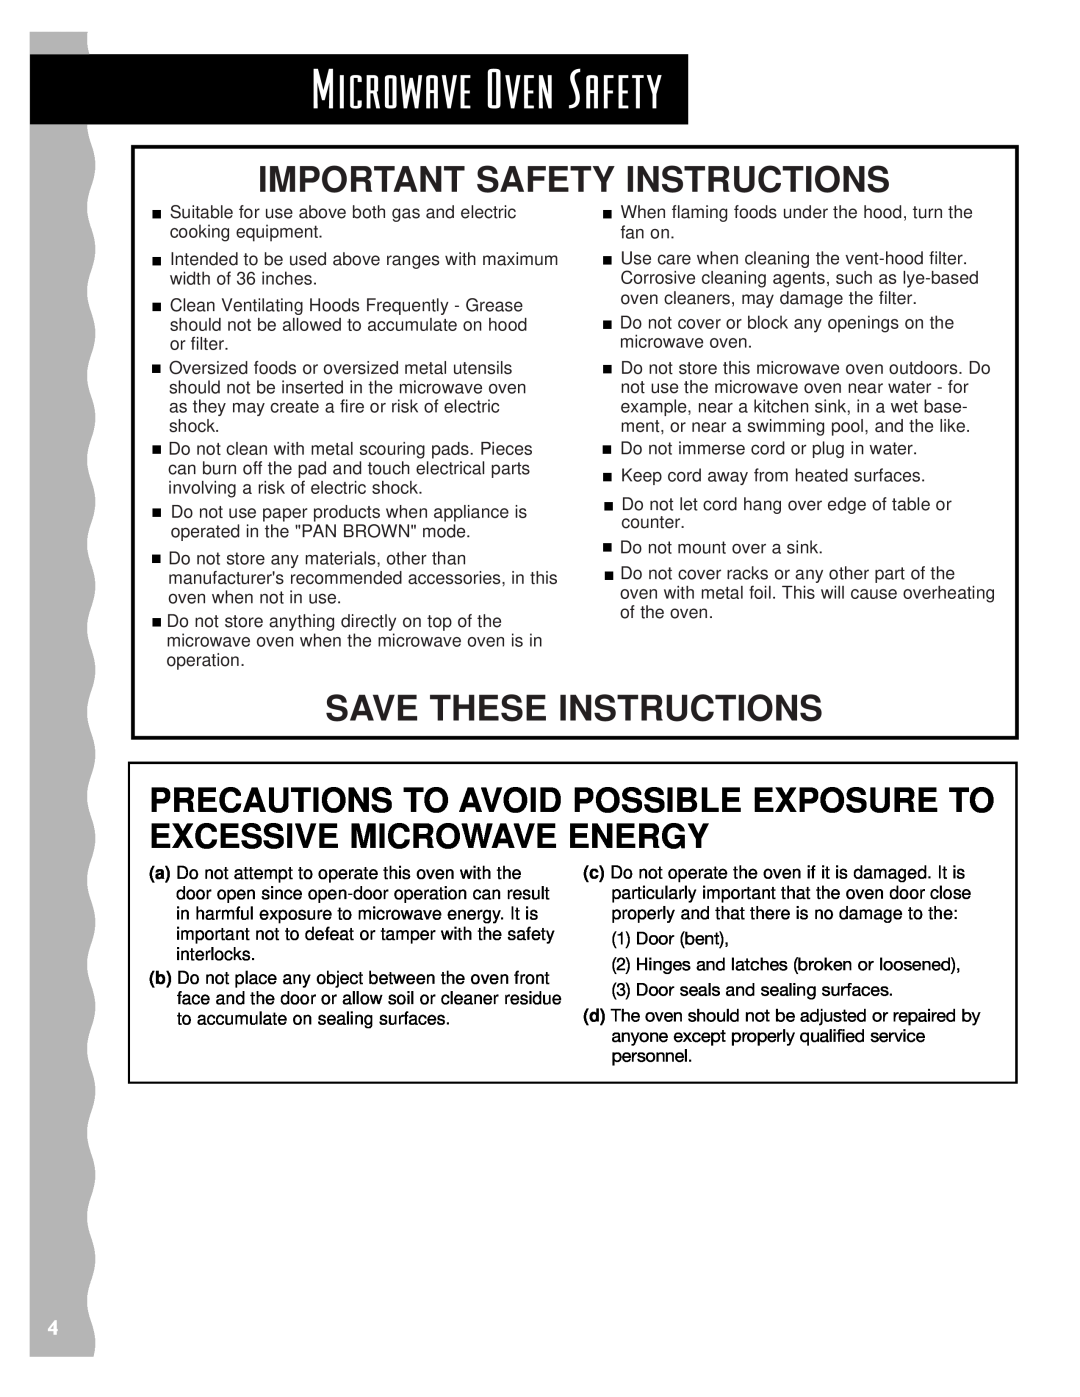 Whirlpool YKHMS145J warranty Precautions To Avoid Possible Exposure To Excessive Microwave Energy, Microwave Oven Safety 